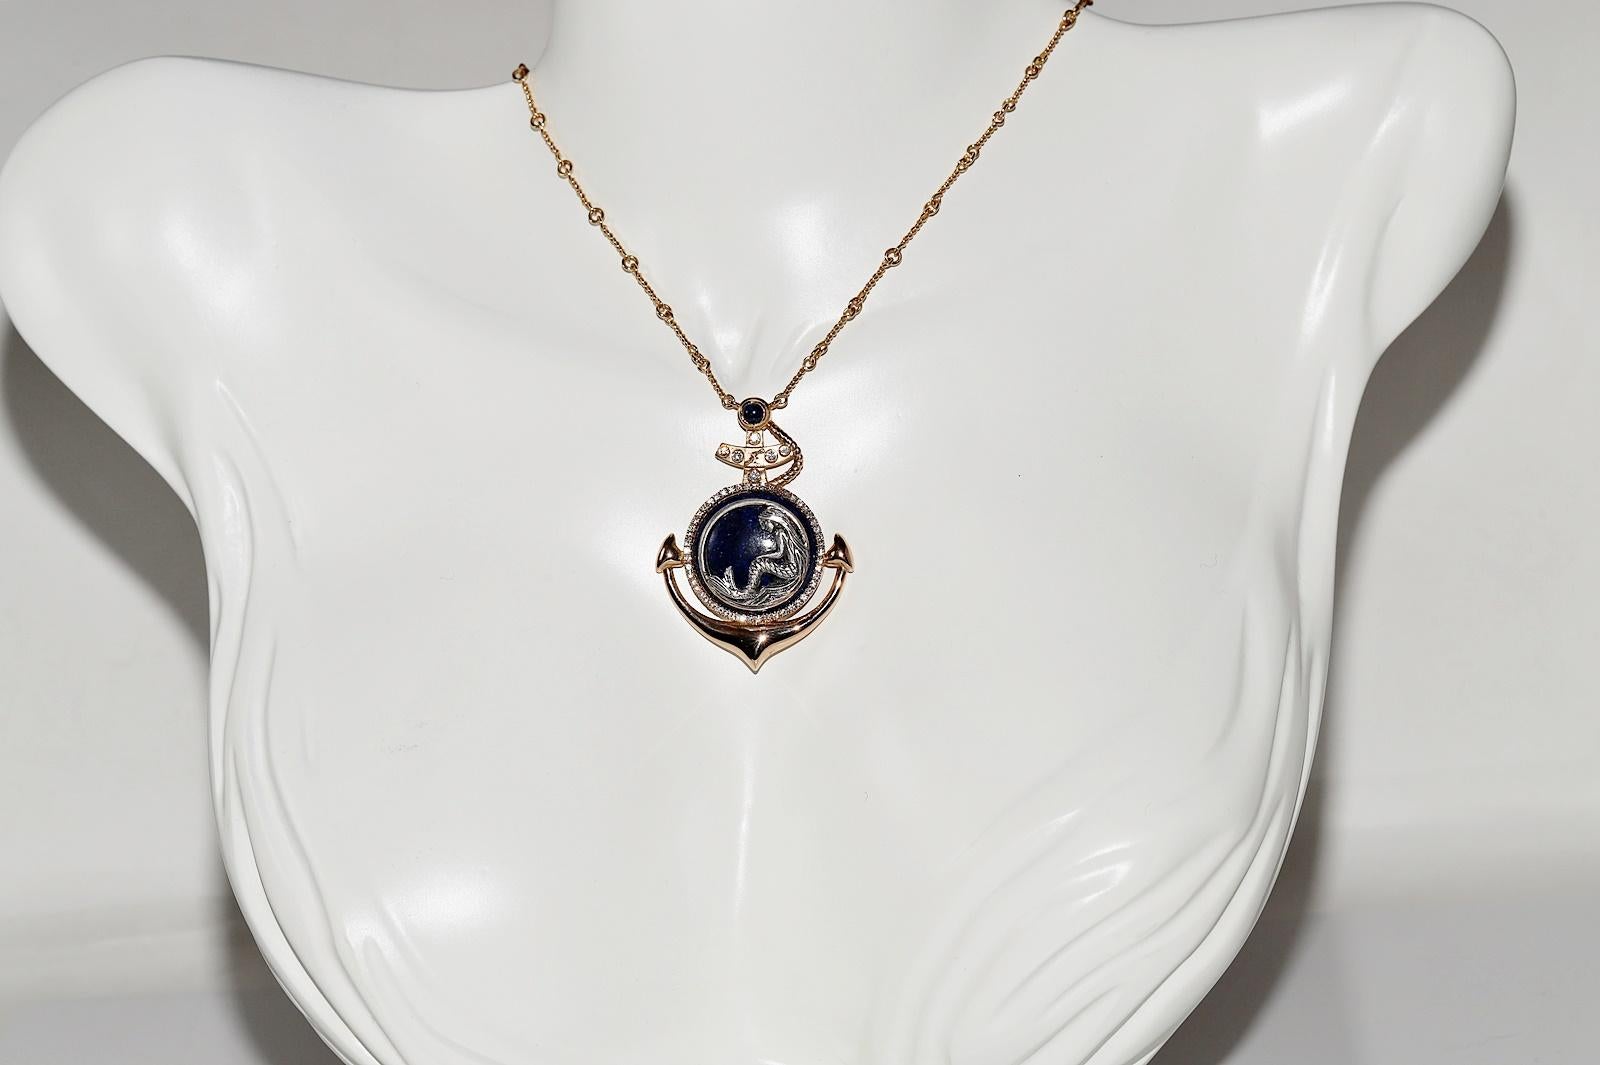 In very good condition.
Total weight is 24.2 grams.
Totally is diamond 0.75 ct.
The diamond is has G-H color and vvs-vs-s1 clarity.
Totally is sapphire 0.25 ct.
Total lenght is chain 50 cm.
Acid tested to be 18k real gold.
Please contact for any